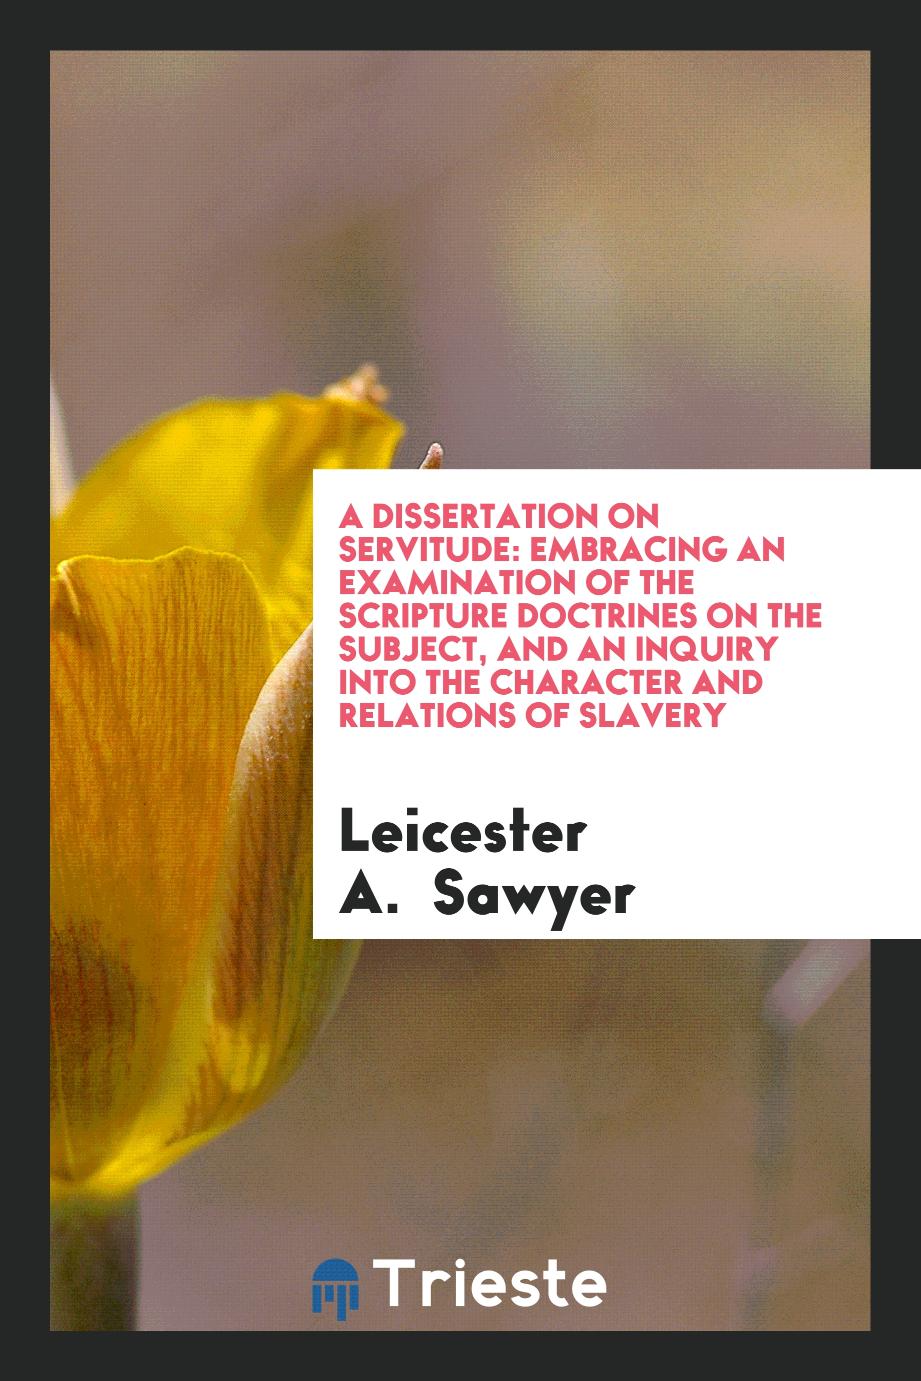 A Dissertation on Servitude: Embracing an Examination of the Scripture Doctrines on the Subject, and an Inquiry into the Character and Relations of Slavery